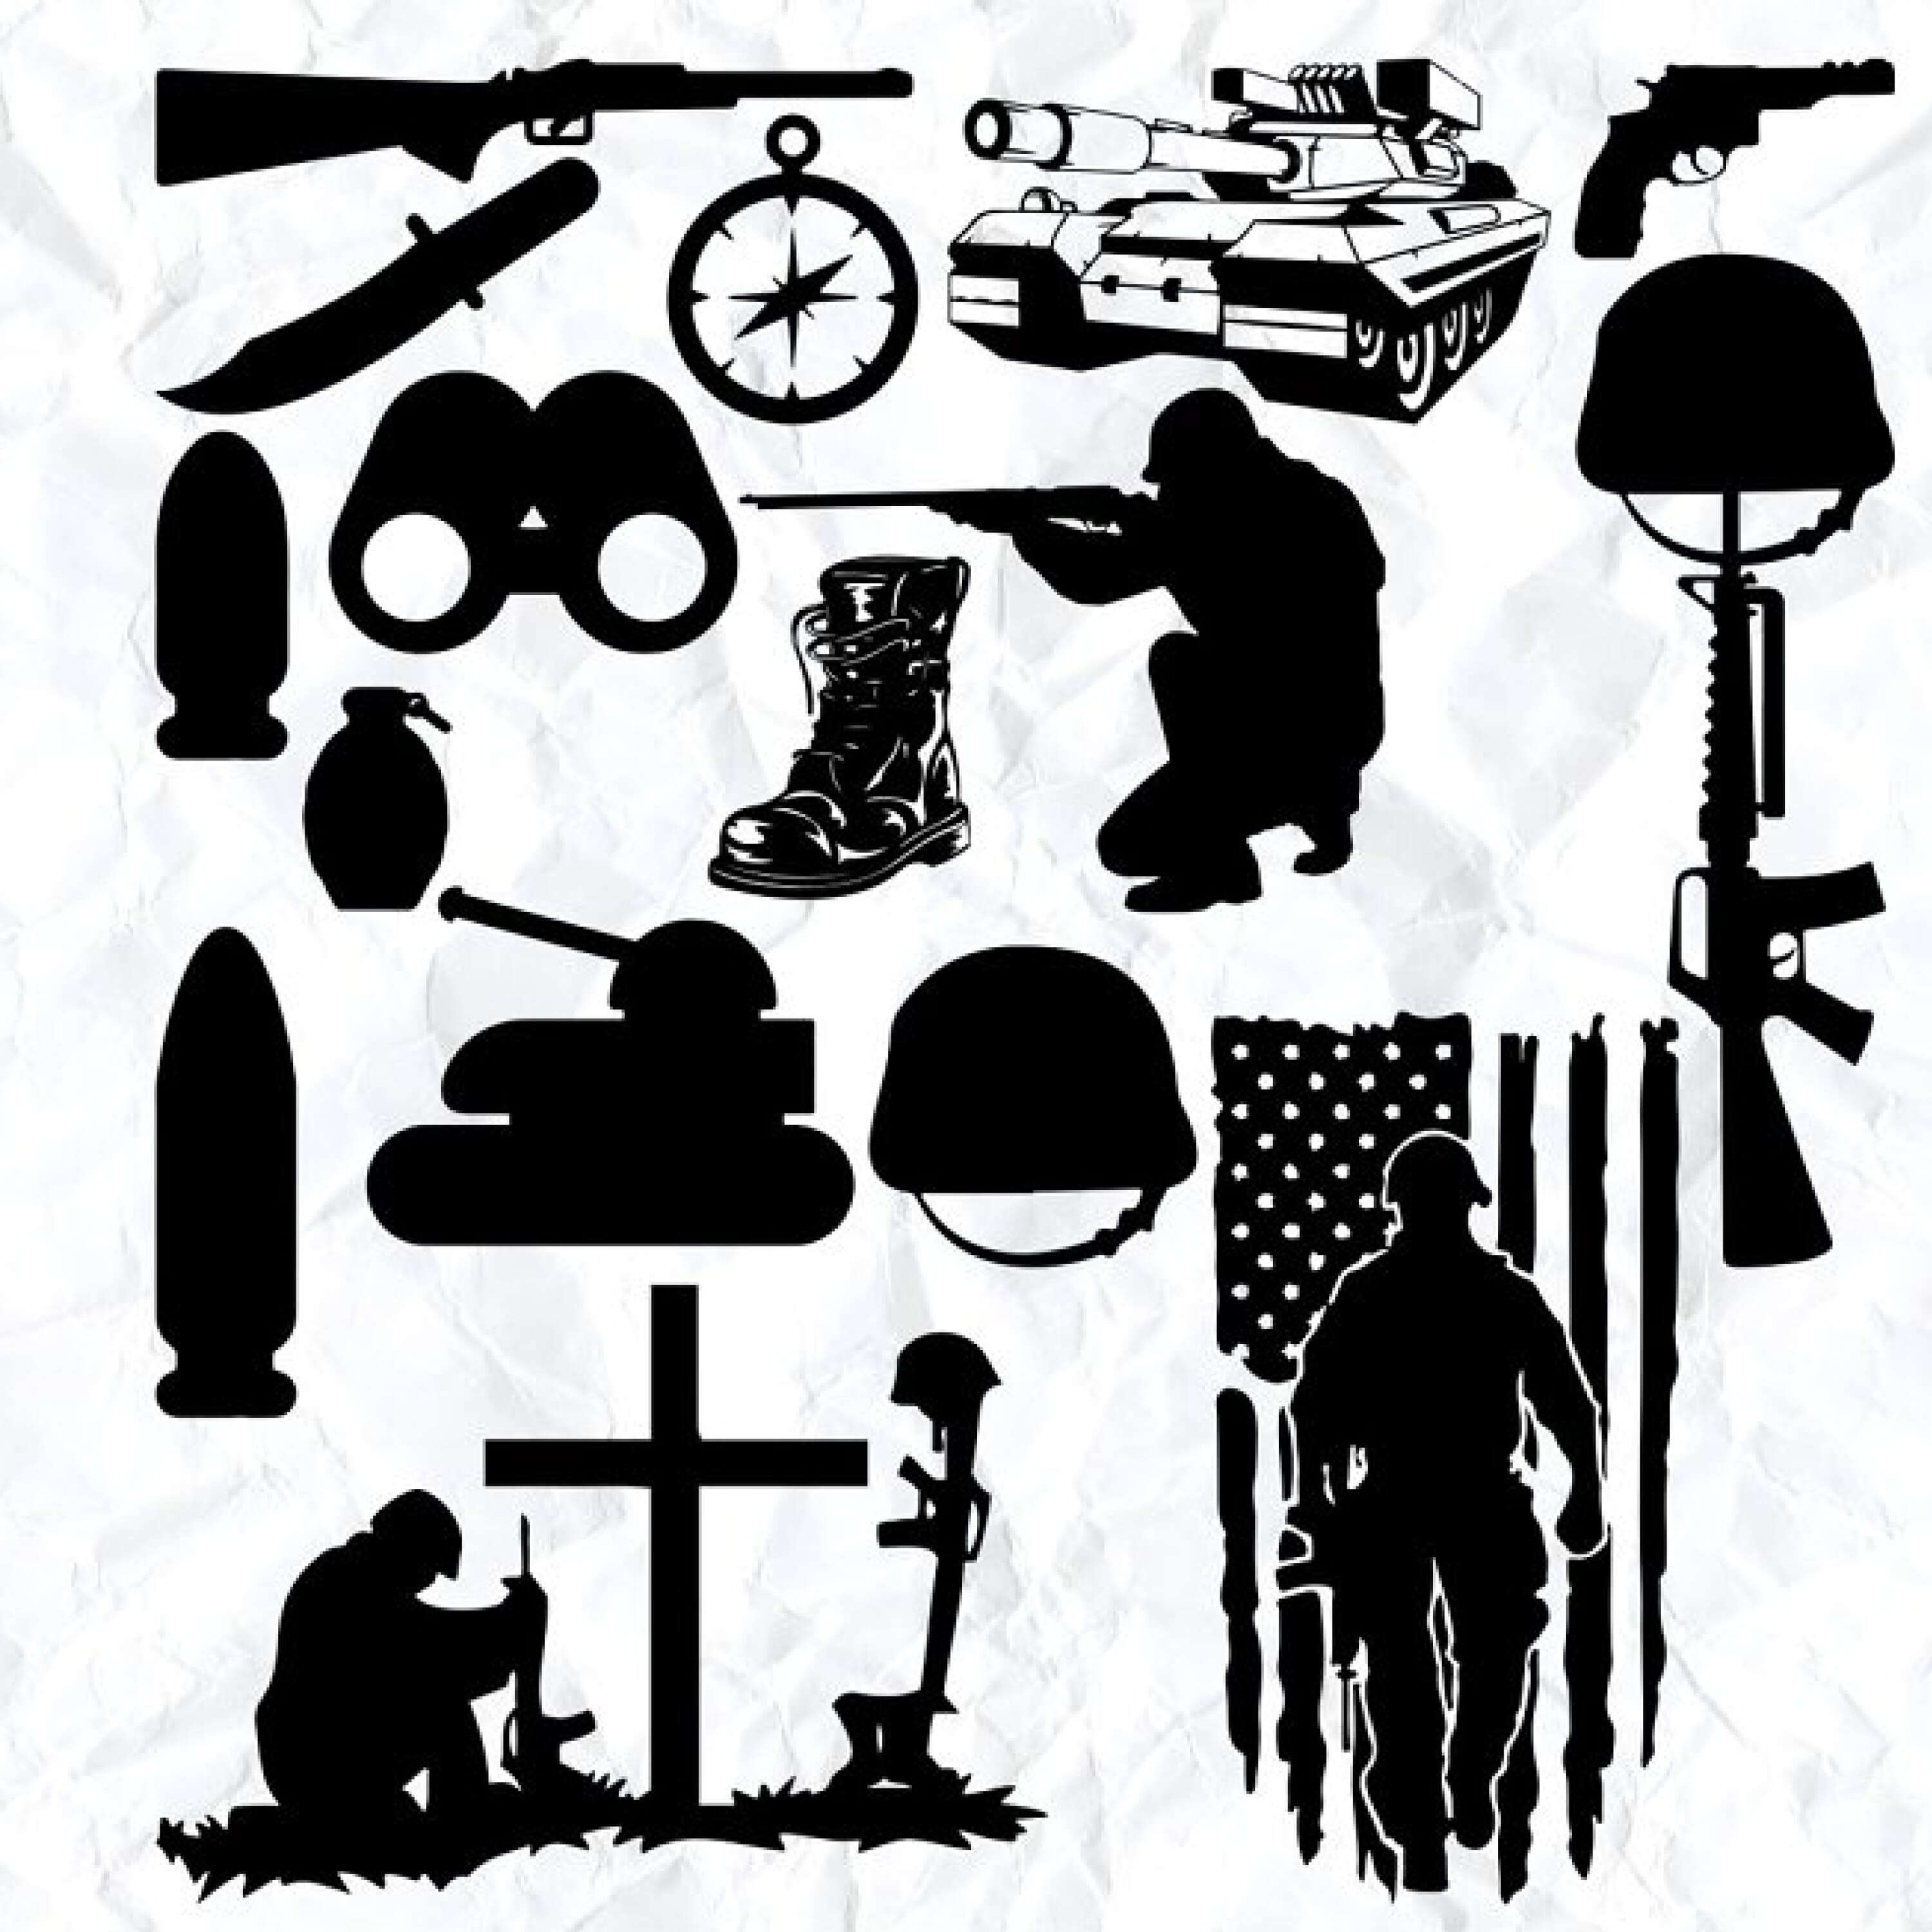 US flag, military equipment, weapons and more.